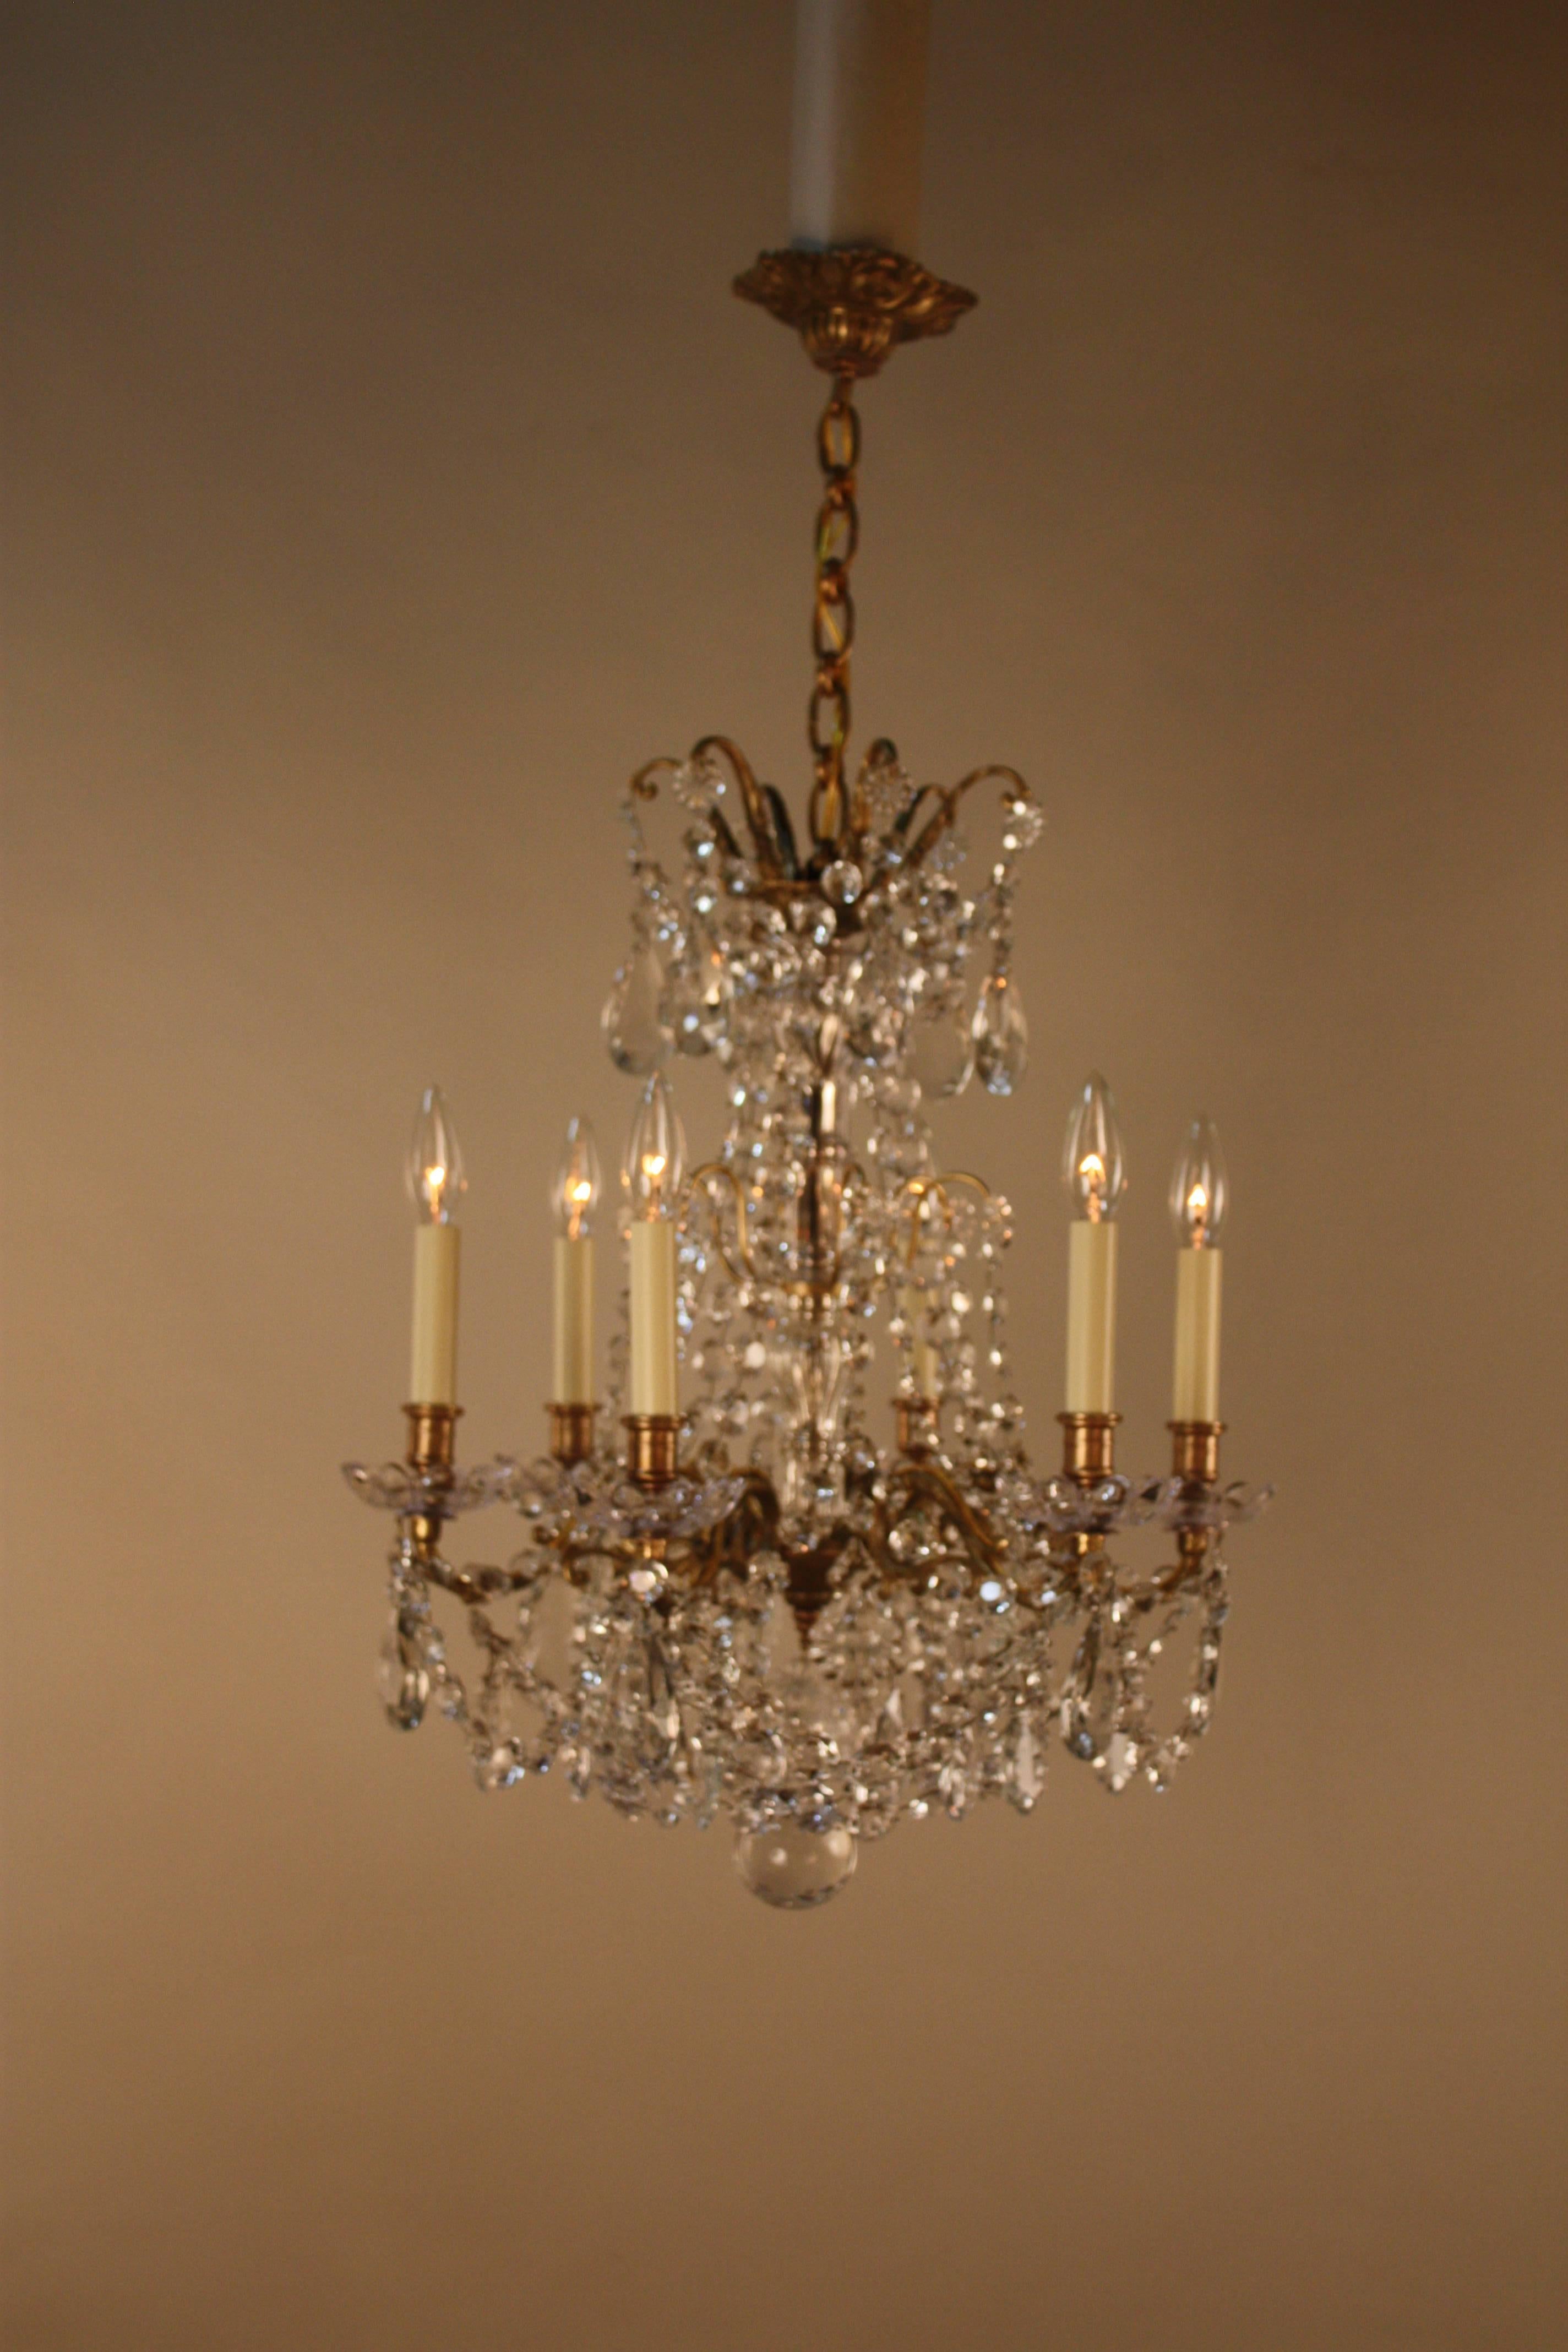 Early 20th century six-light bronze and crystal chandelier.